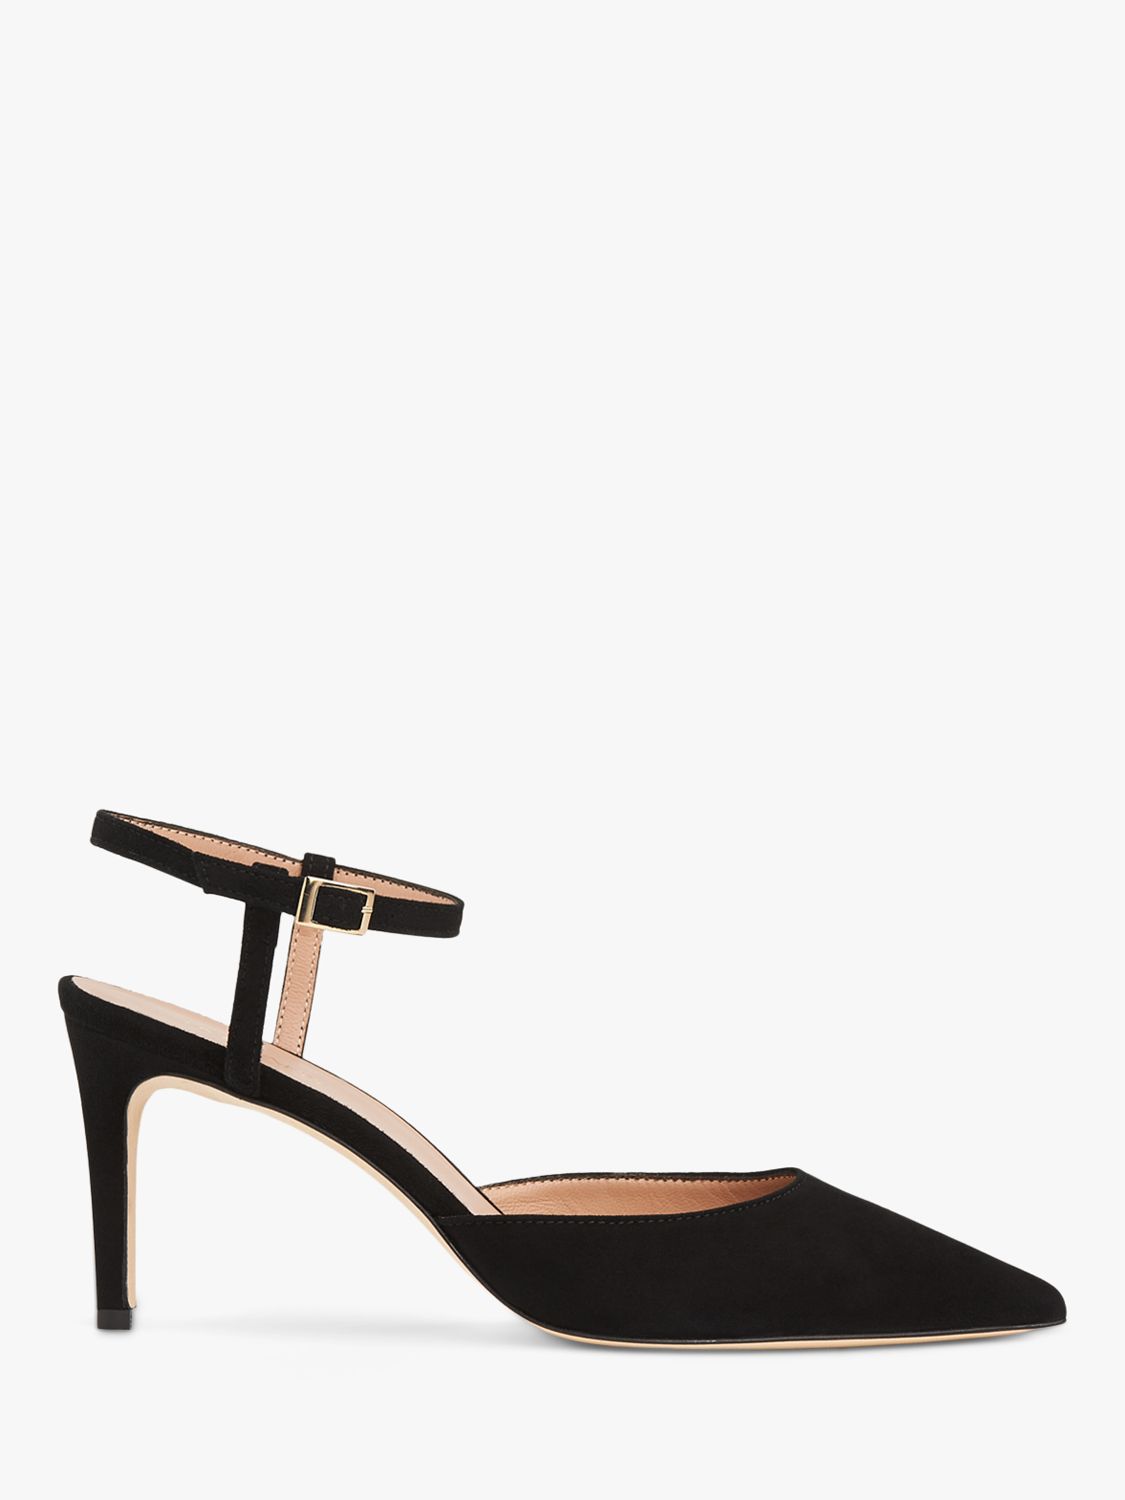 L.K.Bennett Hope Suede Pointed Court Shoes, Black at John Lewis & Partners